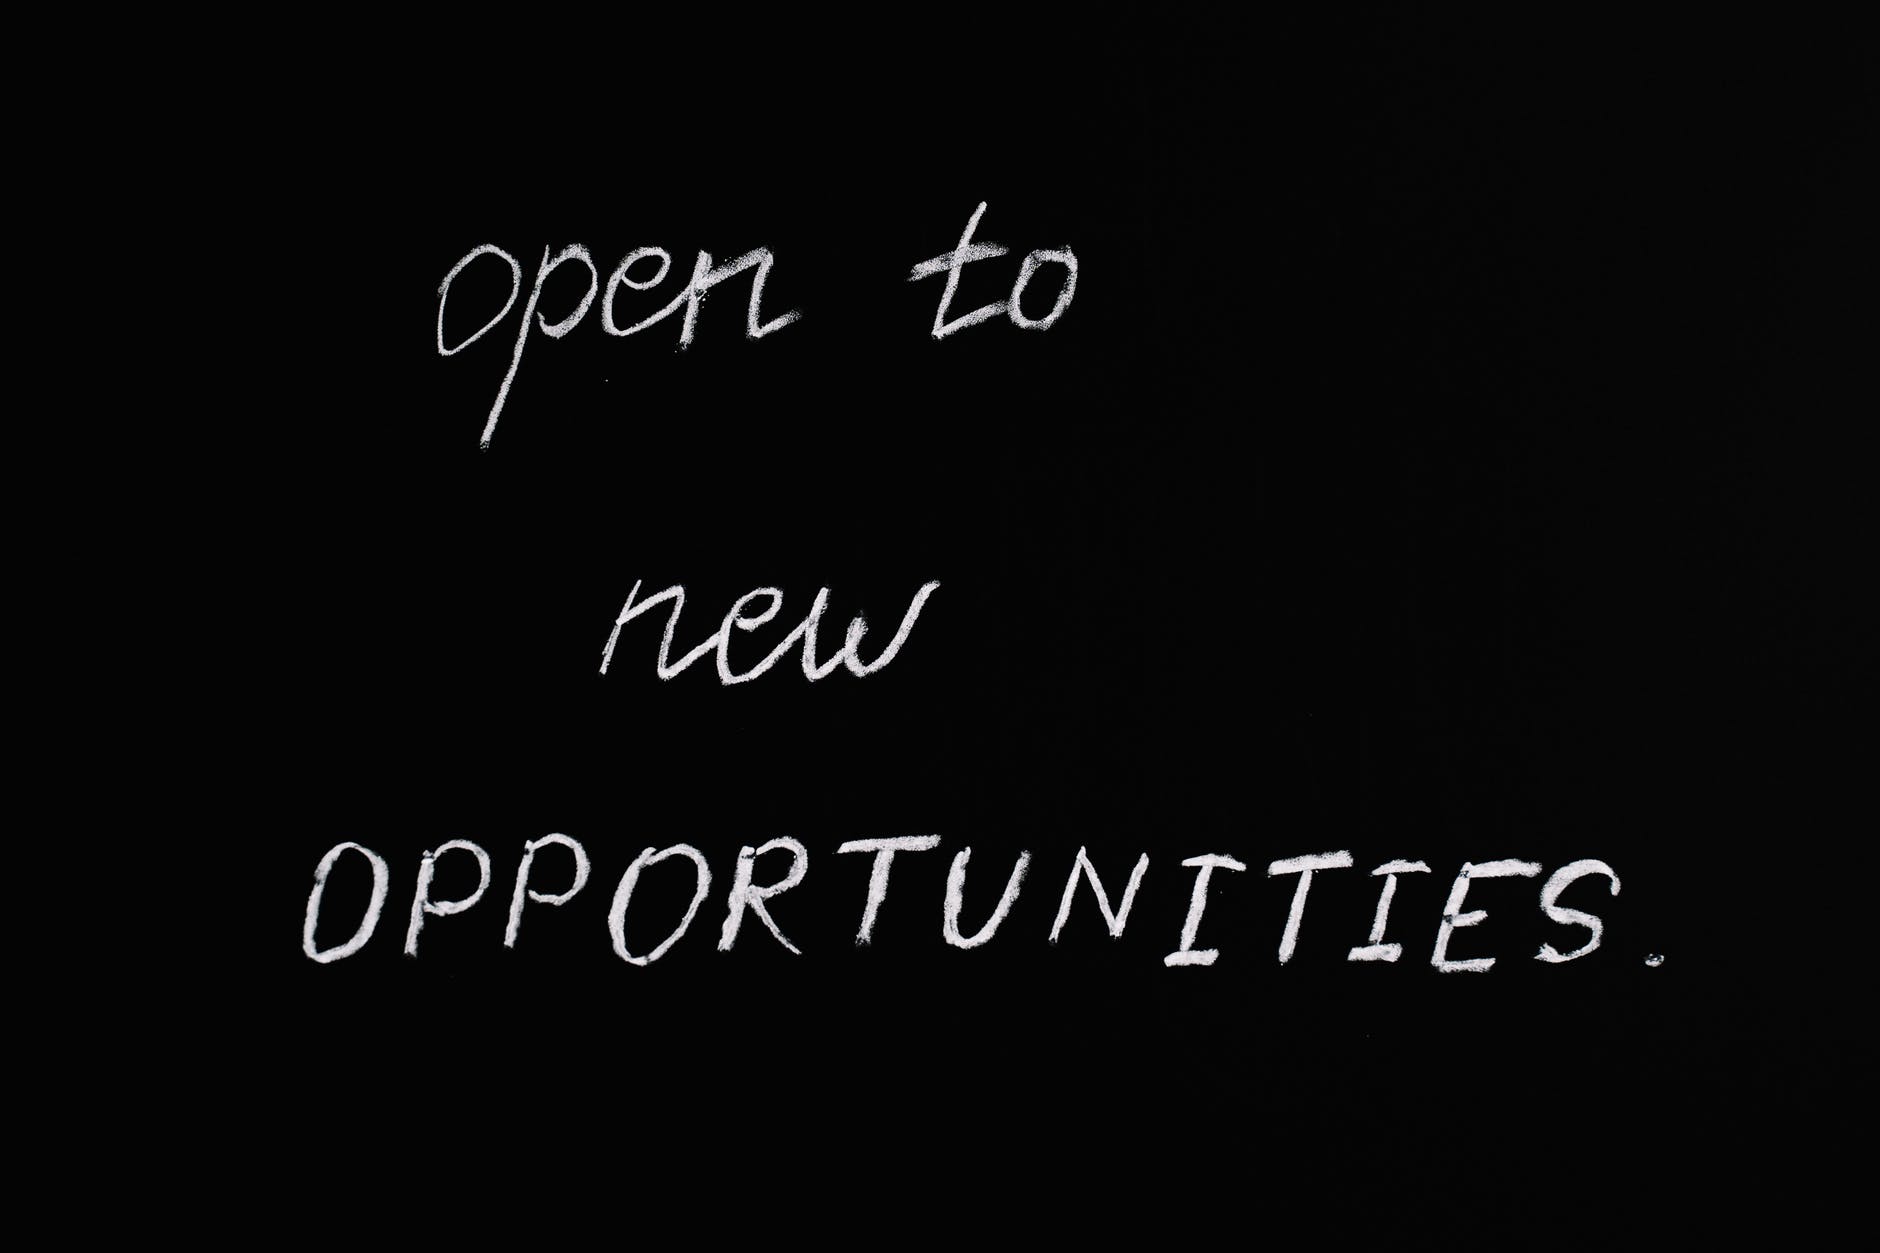 open to new opportunities lettering text on black background